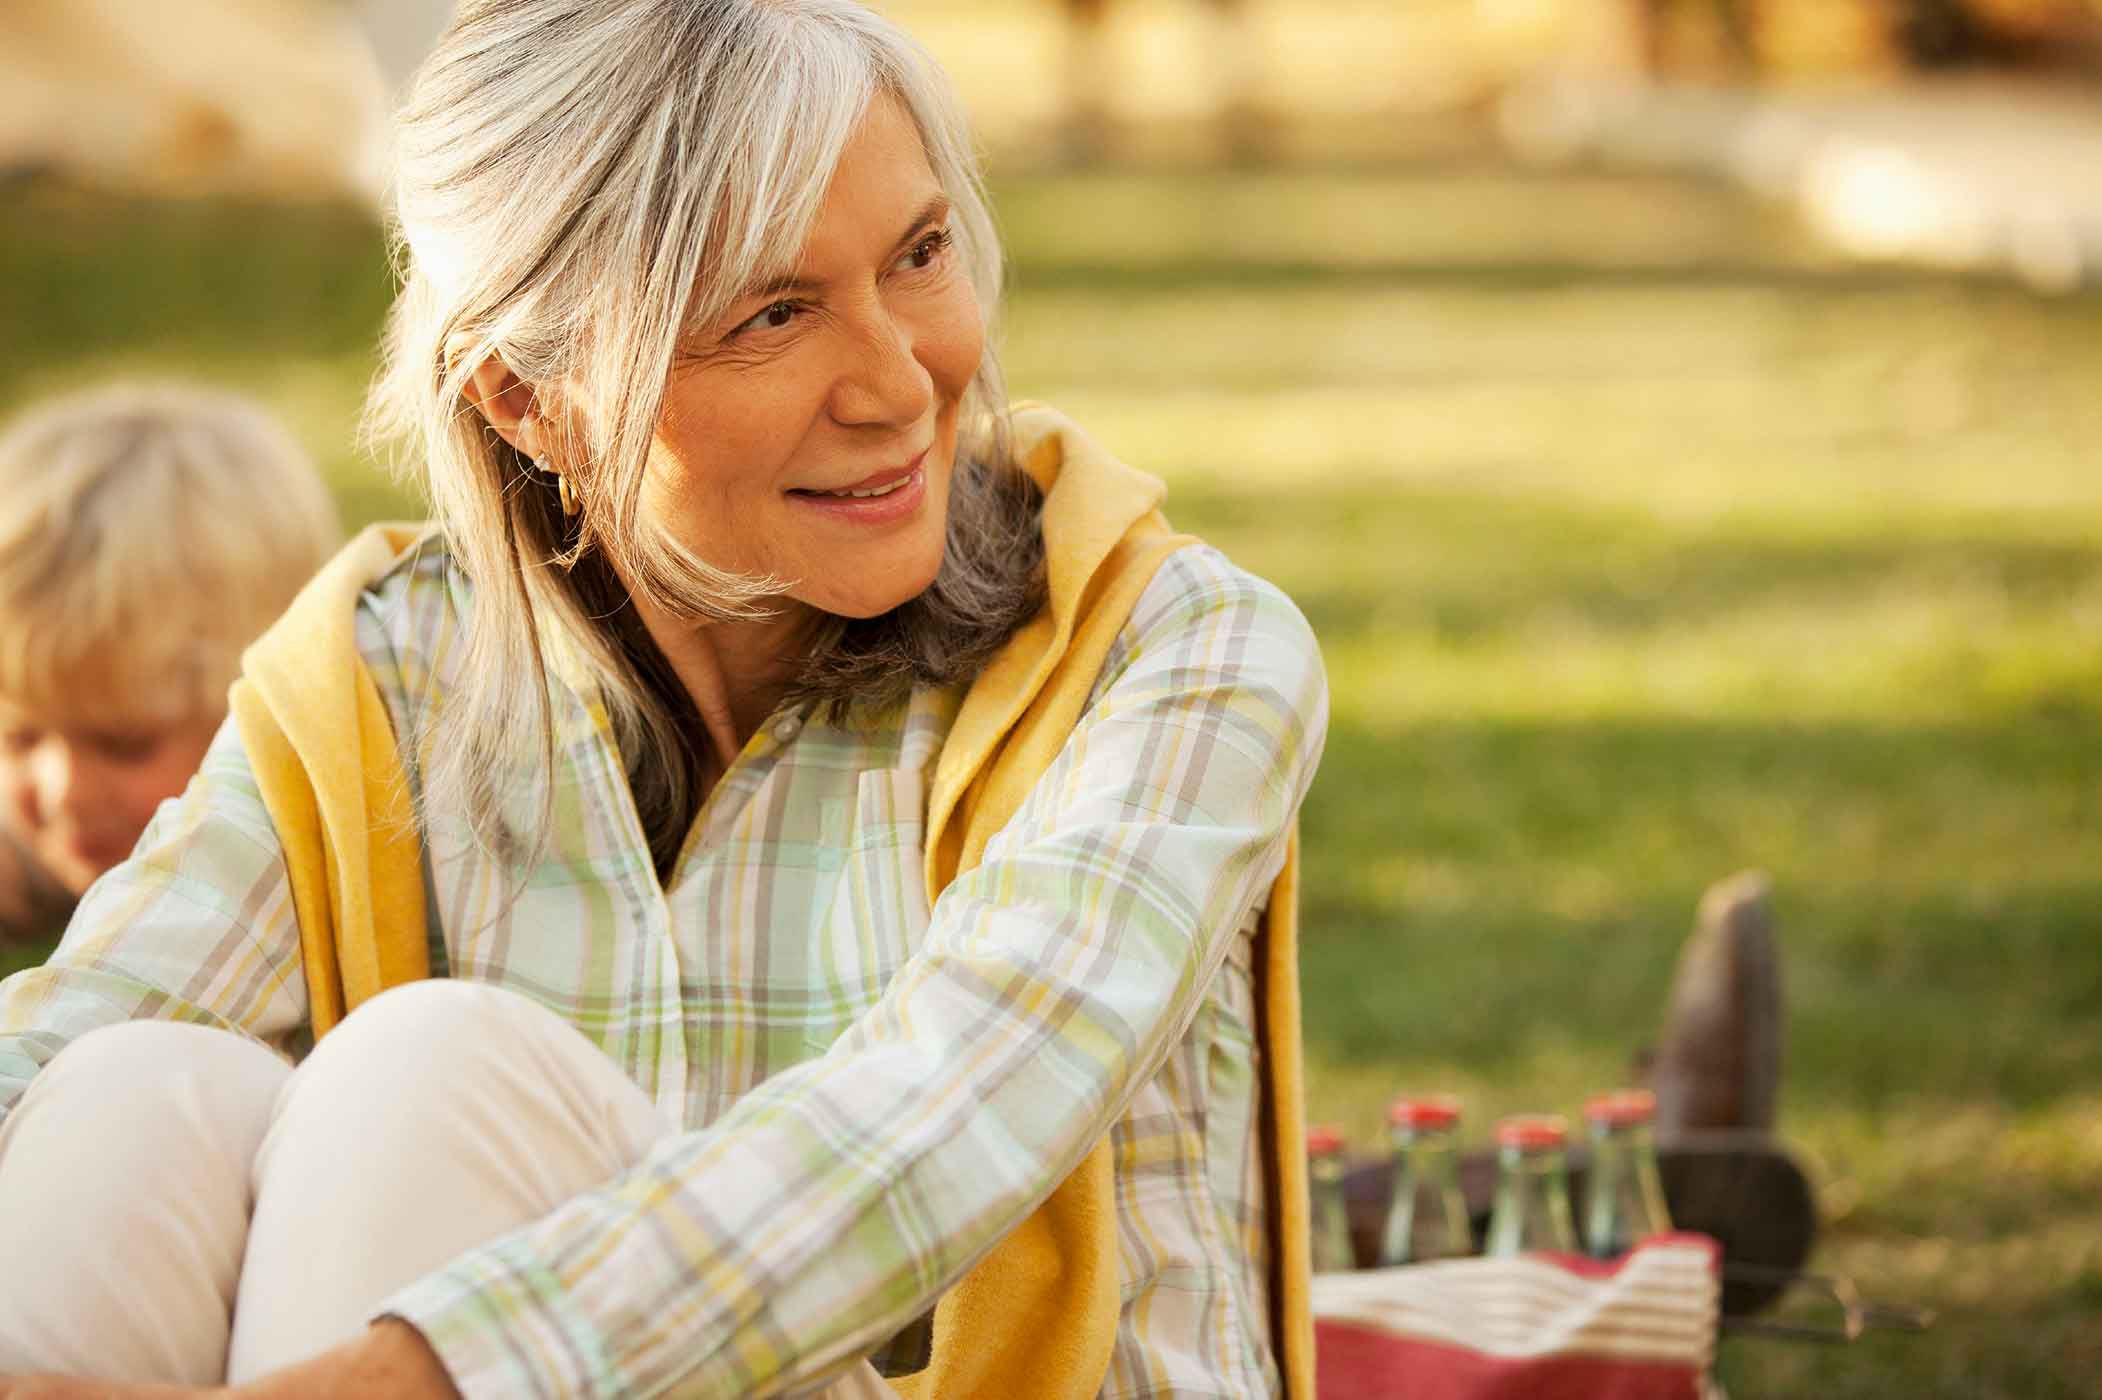 Smiling older woman relaxing outdoors